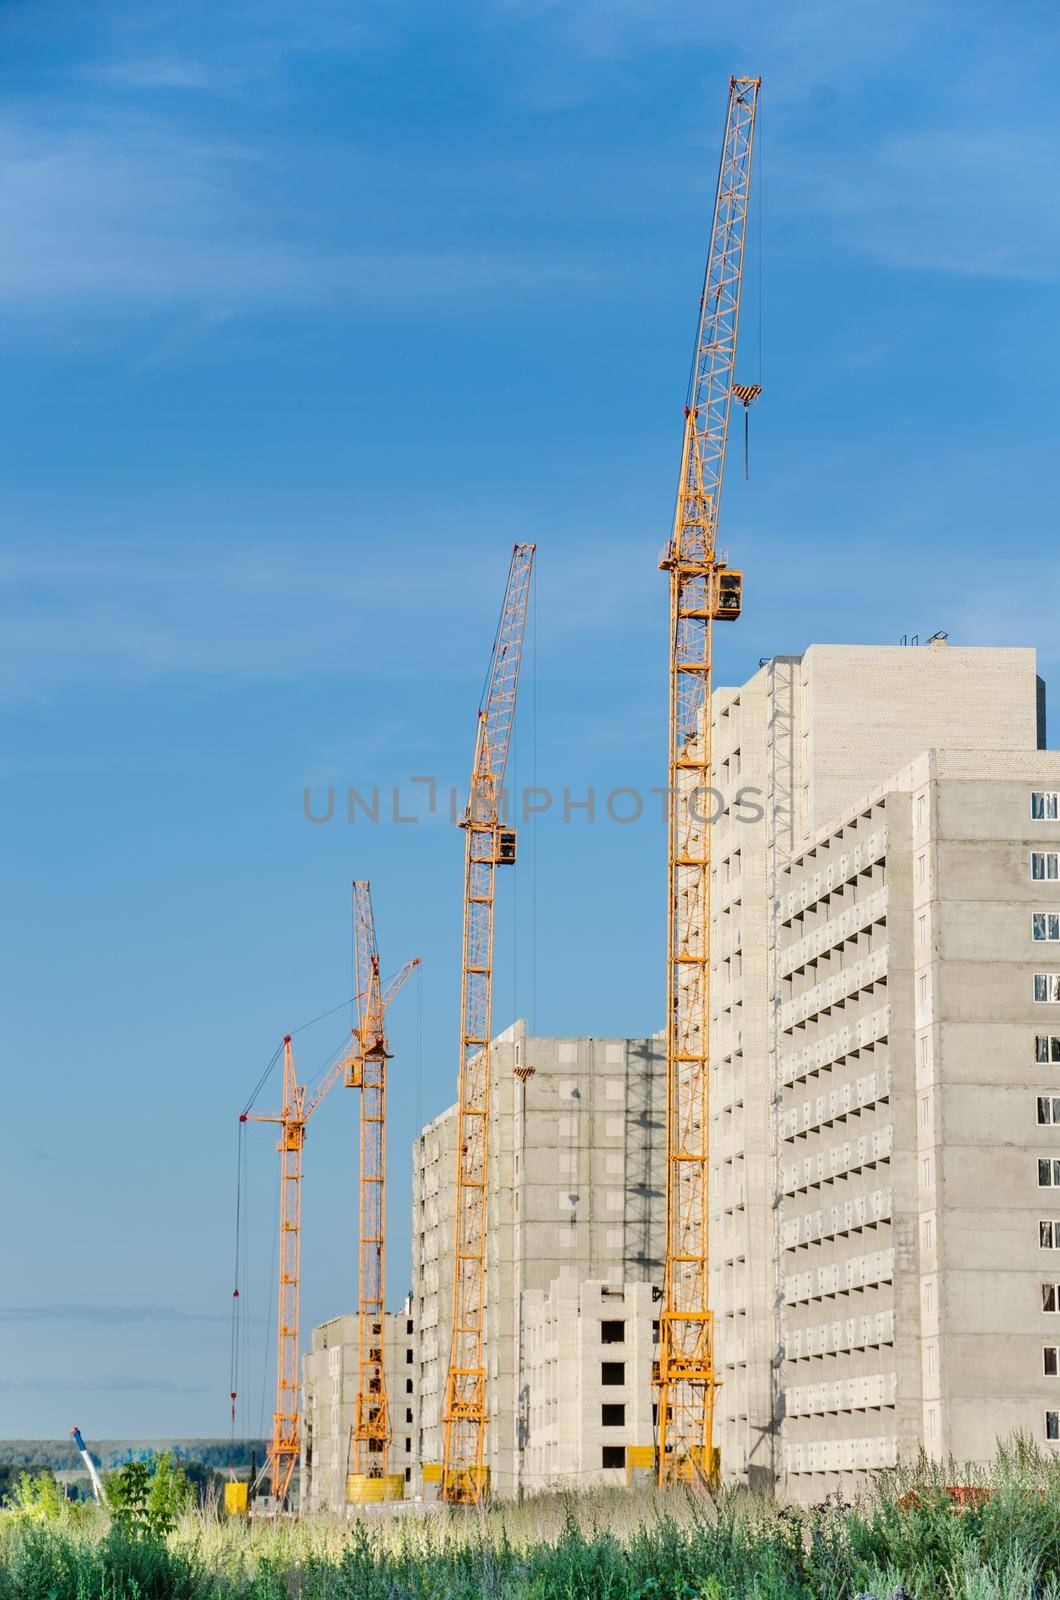 Construction site with cranes.